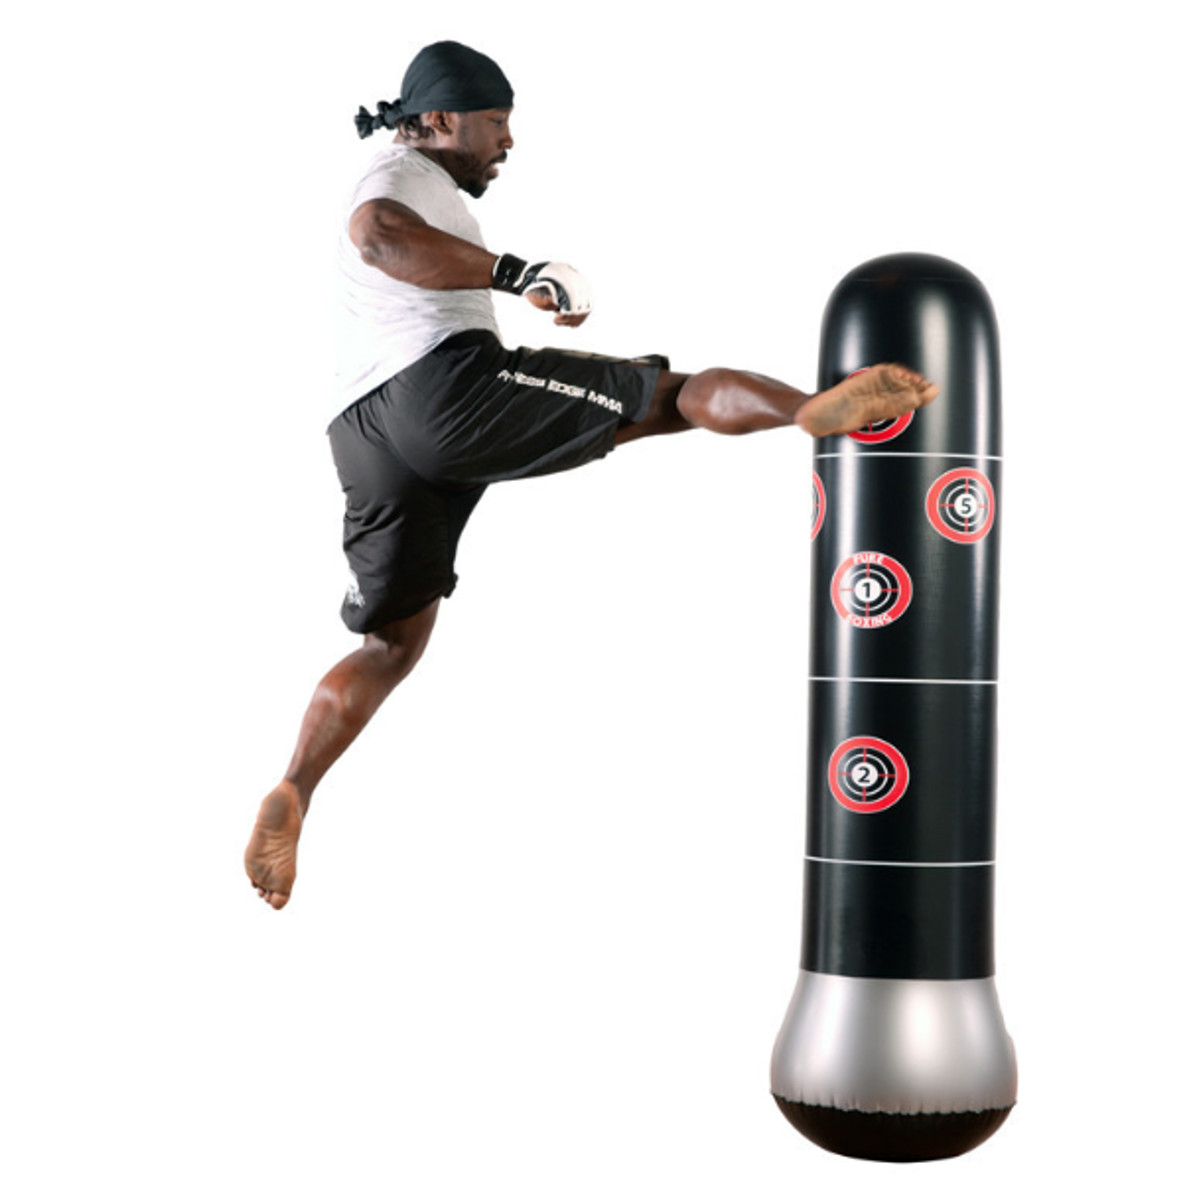 1.5m New Inflatable Stress Punching Tower Bag Boxing Standing Water Base Training Pressure Relief Bounce Back Sandbag With Pump